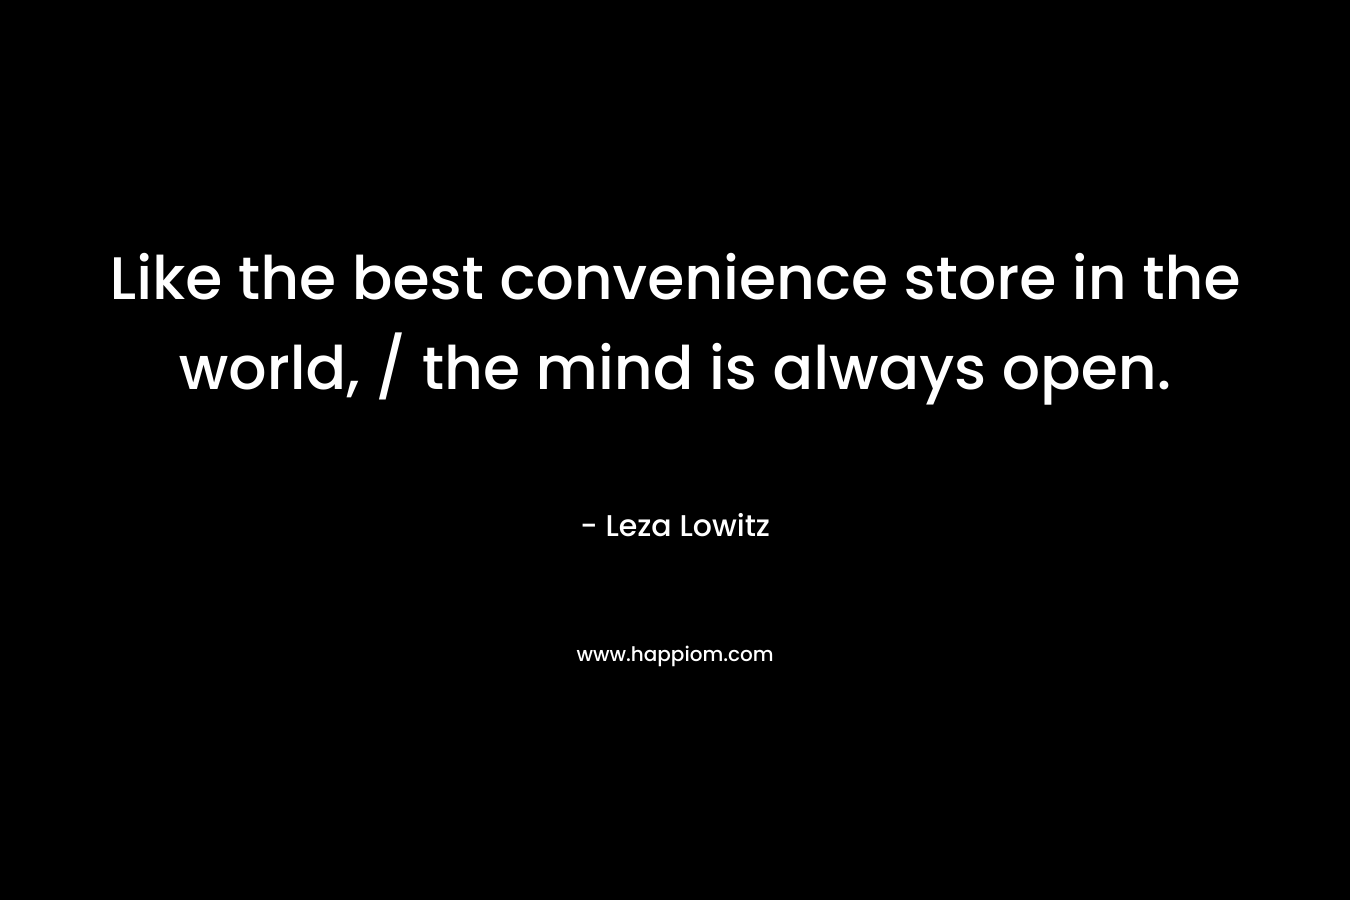 Like the best convenience store in the world, / the mind is always open.